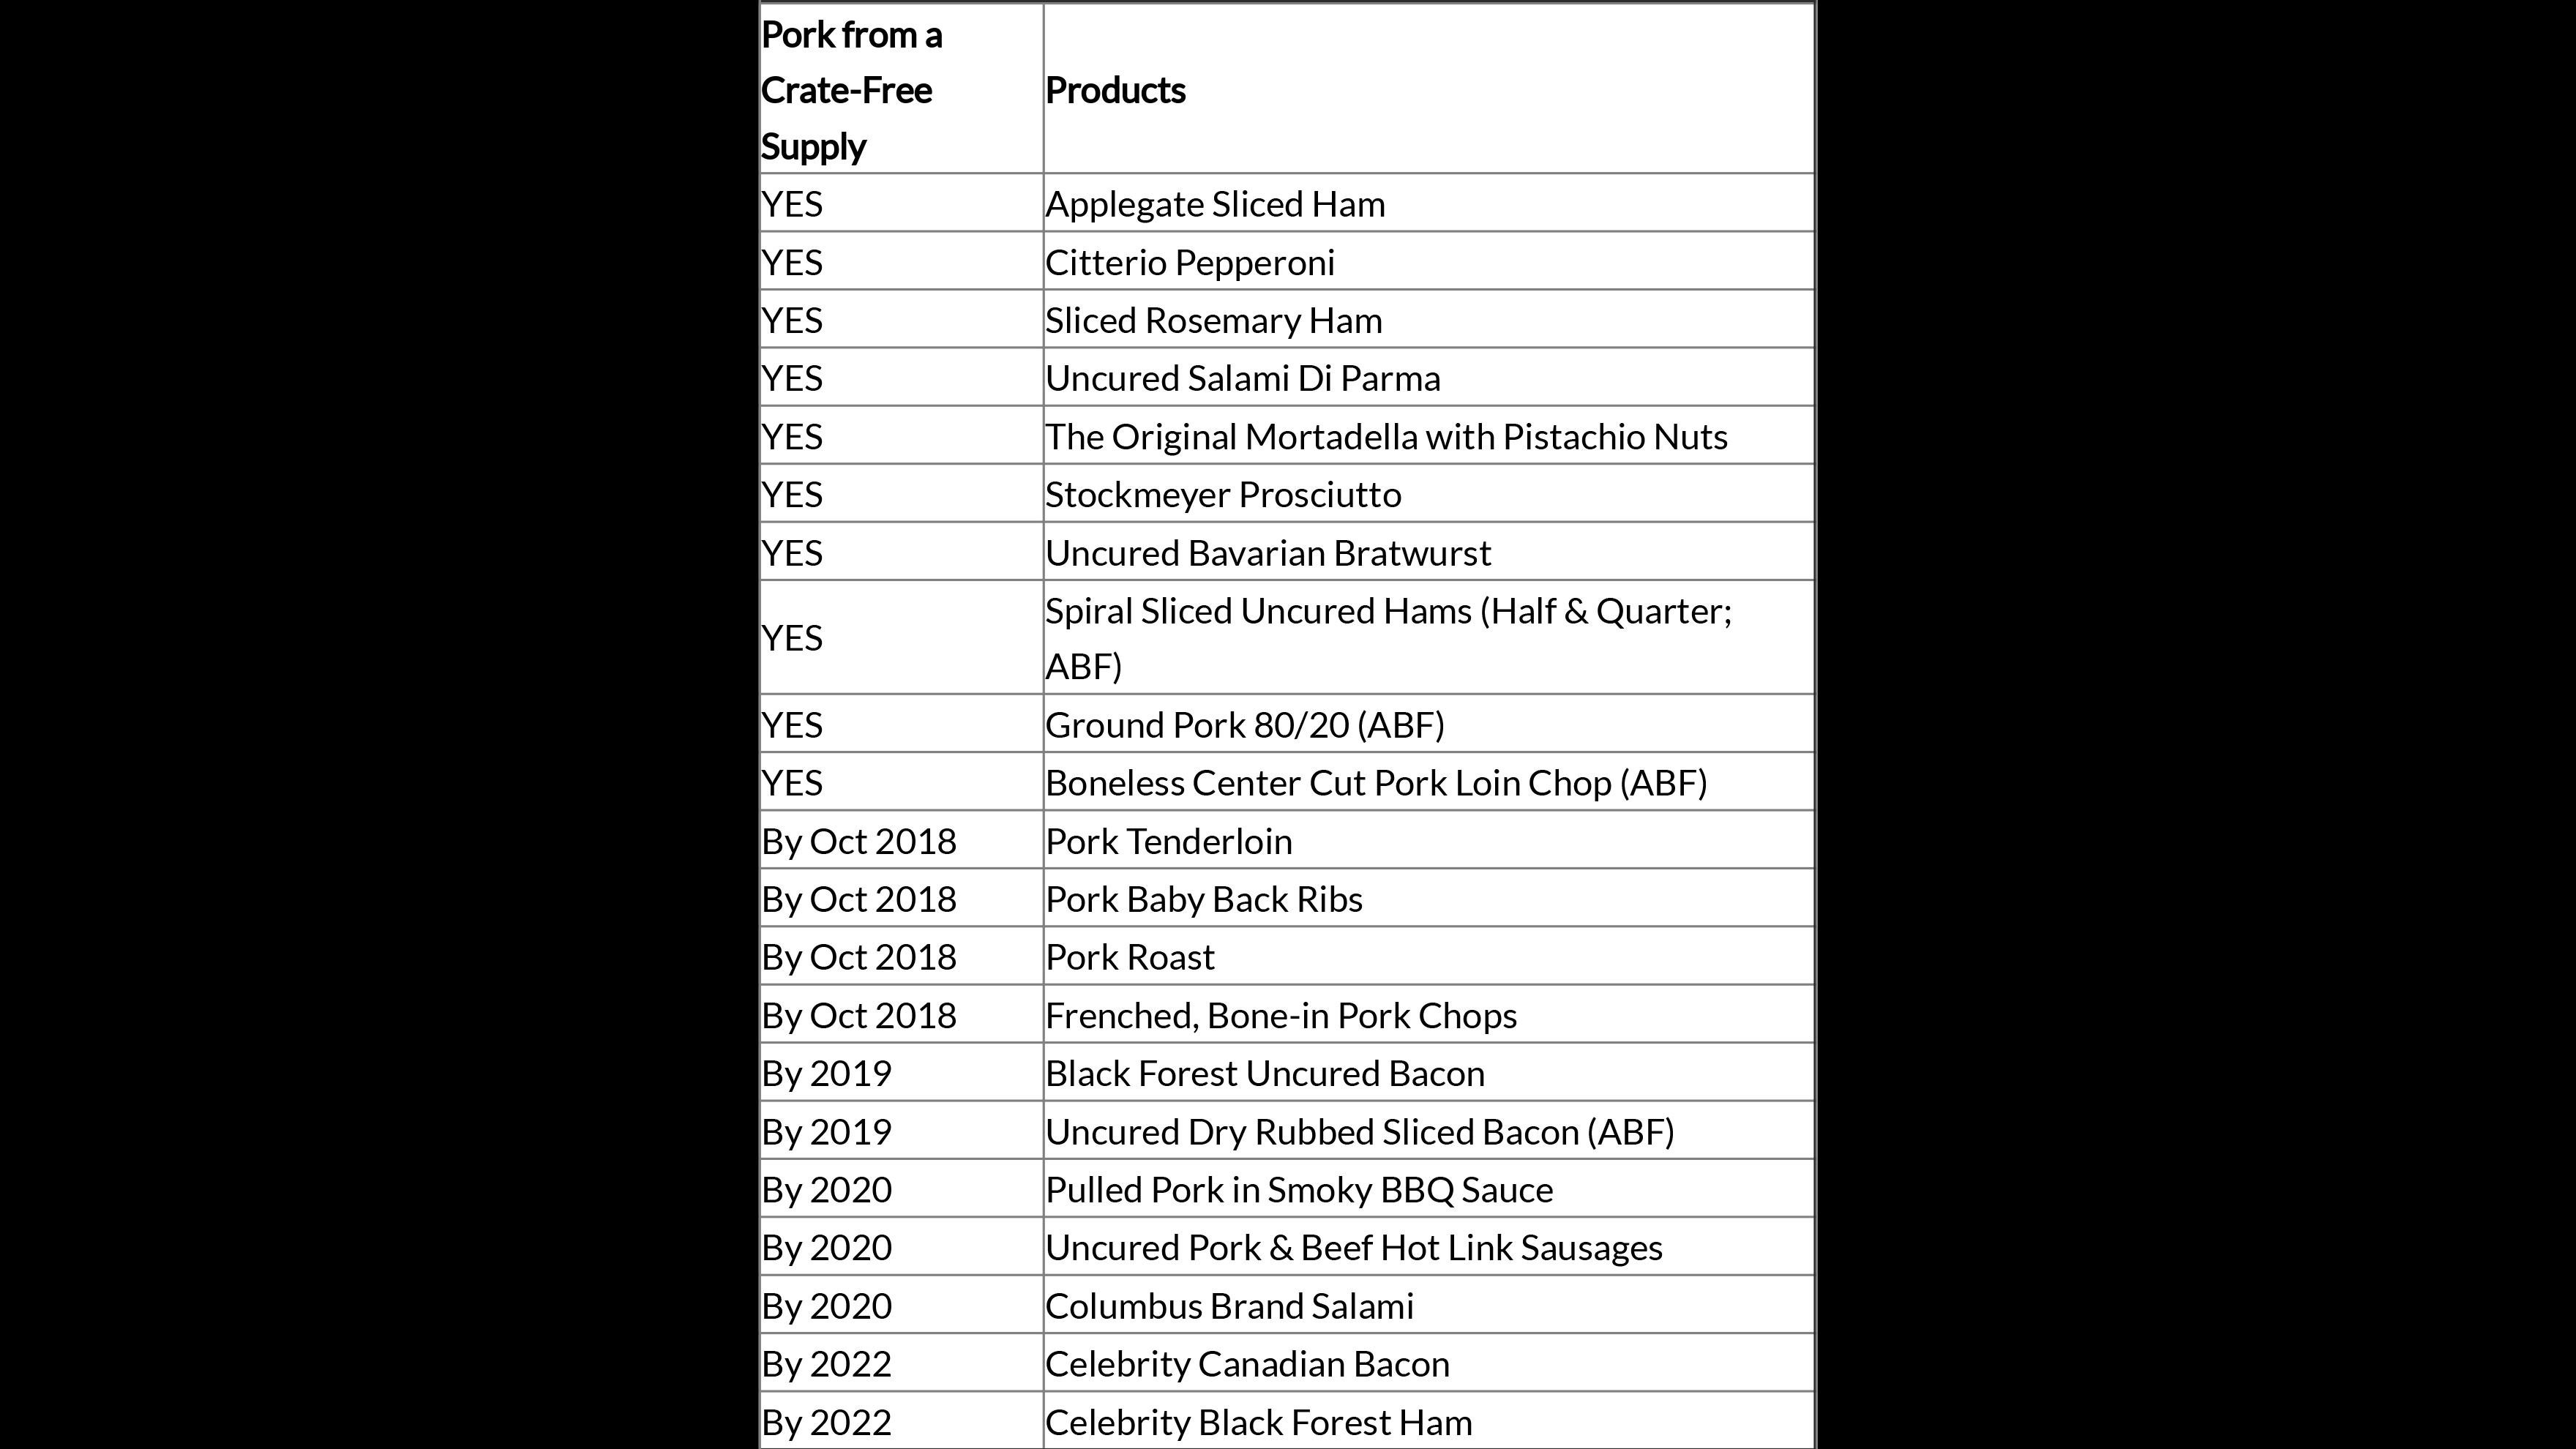 Trader Joe's on Tuesday posted an updated list of pork products that the company says come from crate-free suppliers, in addition to a timeline for adding other crate-free pork products. (Trader Joe's)